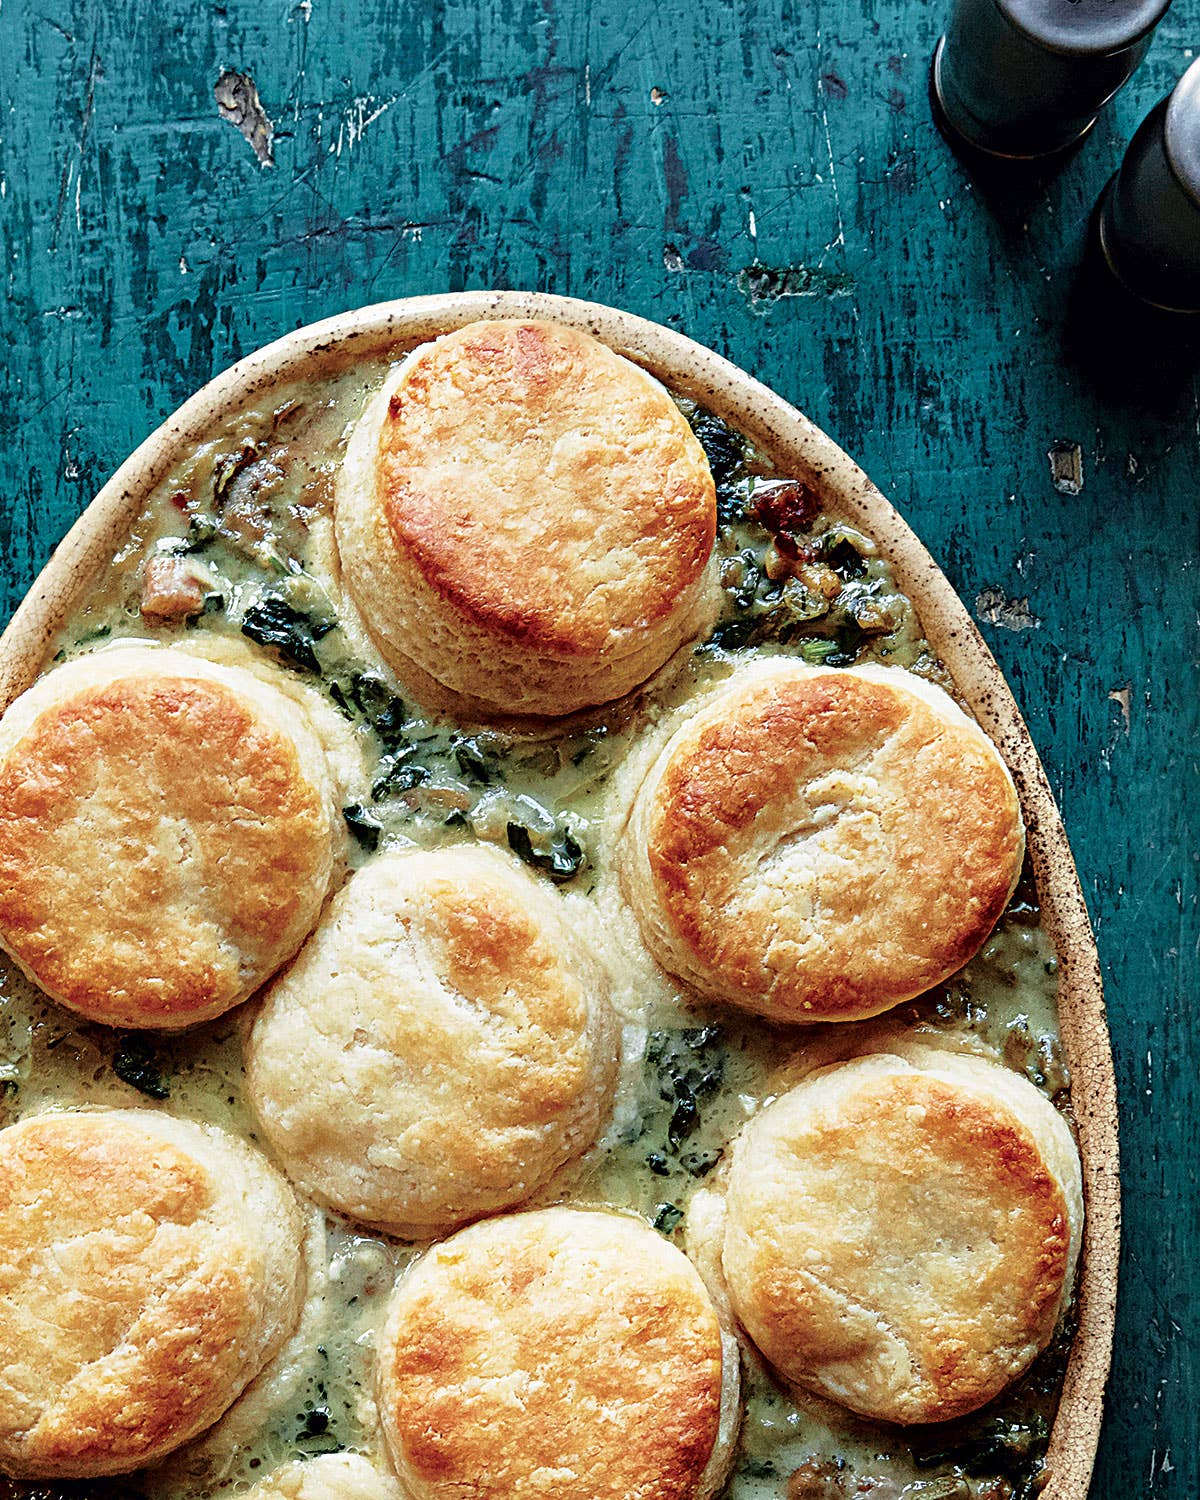 Oyster Pie with Buttermilk Biscuits